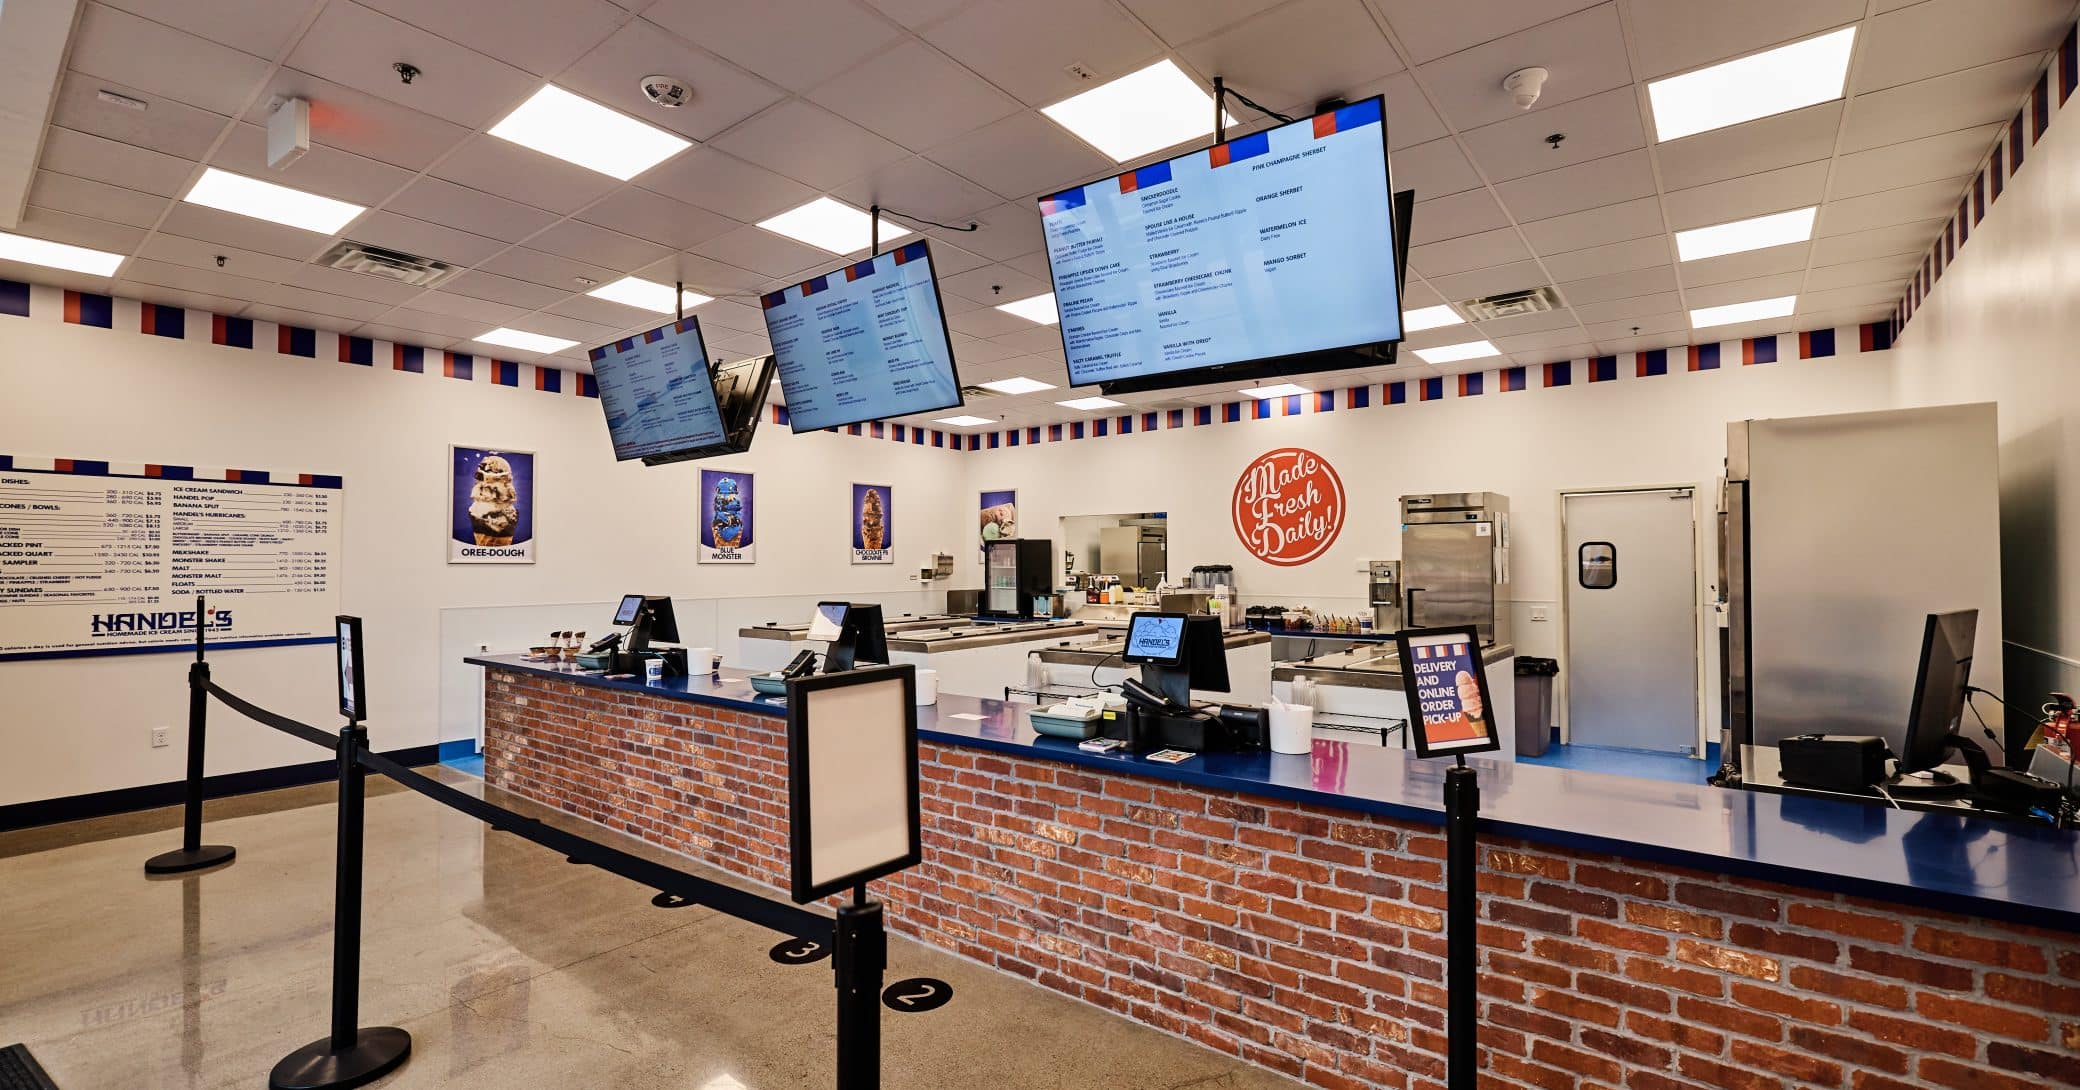 Tenant improvements done by Kalb Industries at Handel's Ice Cream